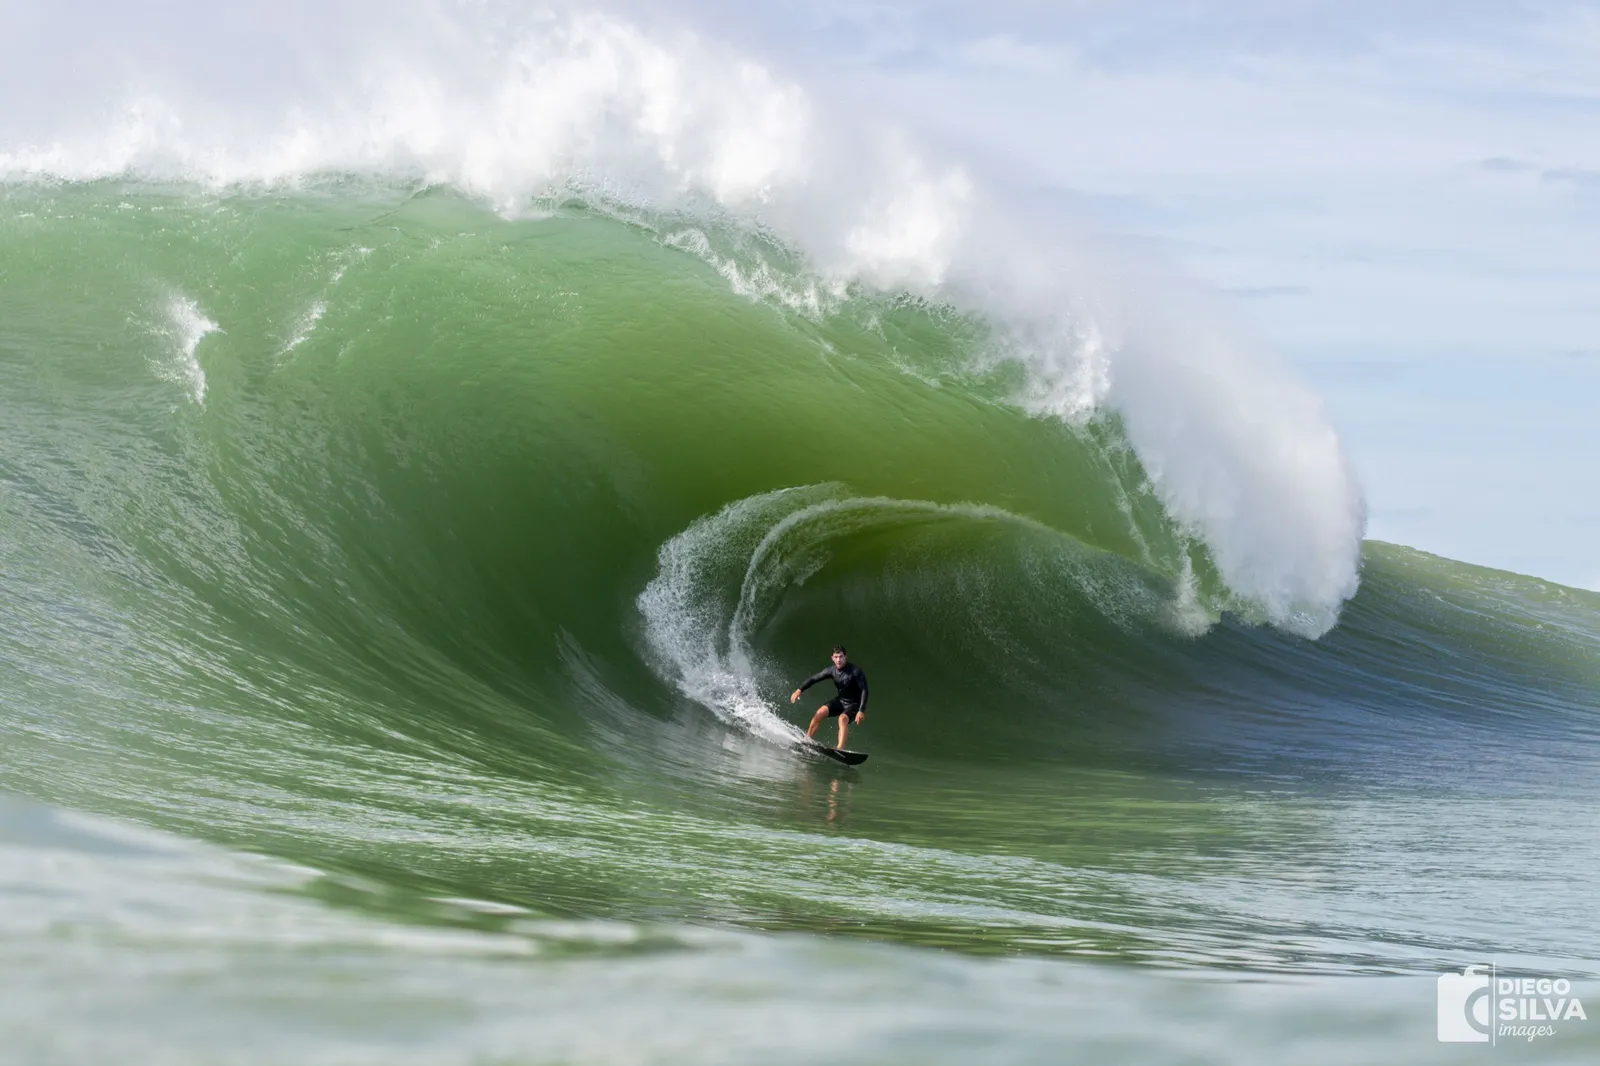 Diego Silva introduces the heaviest wave in the country - The Avalanche!